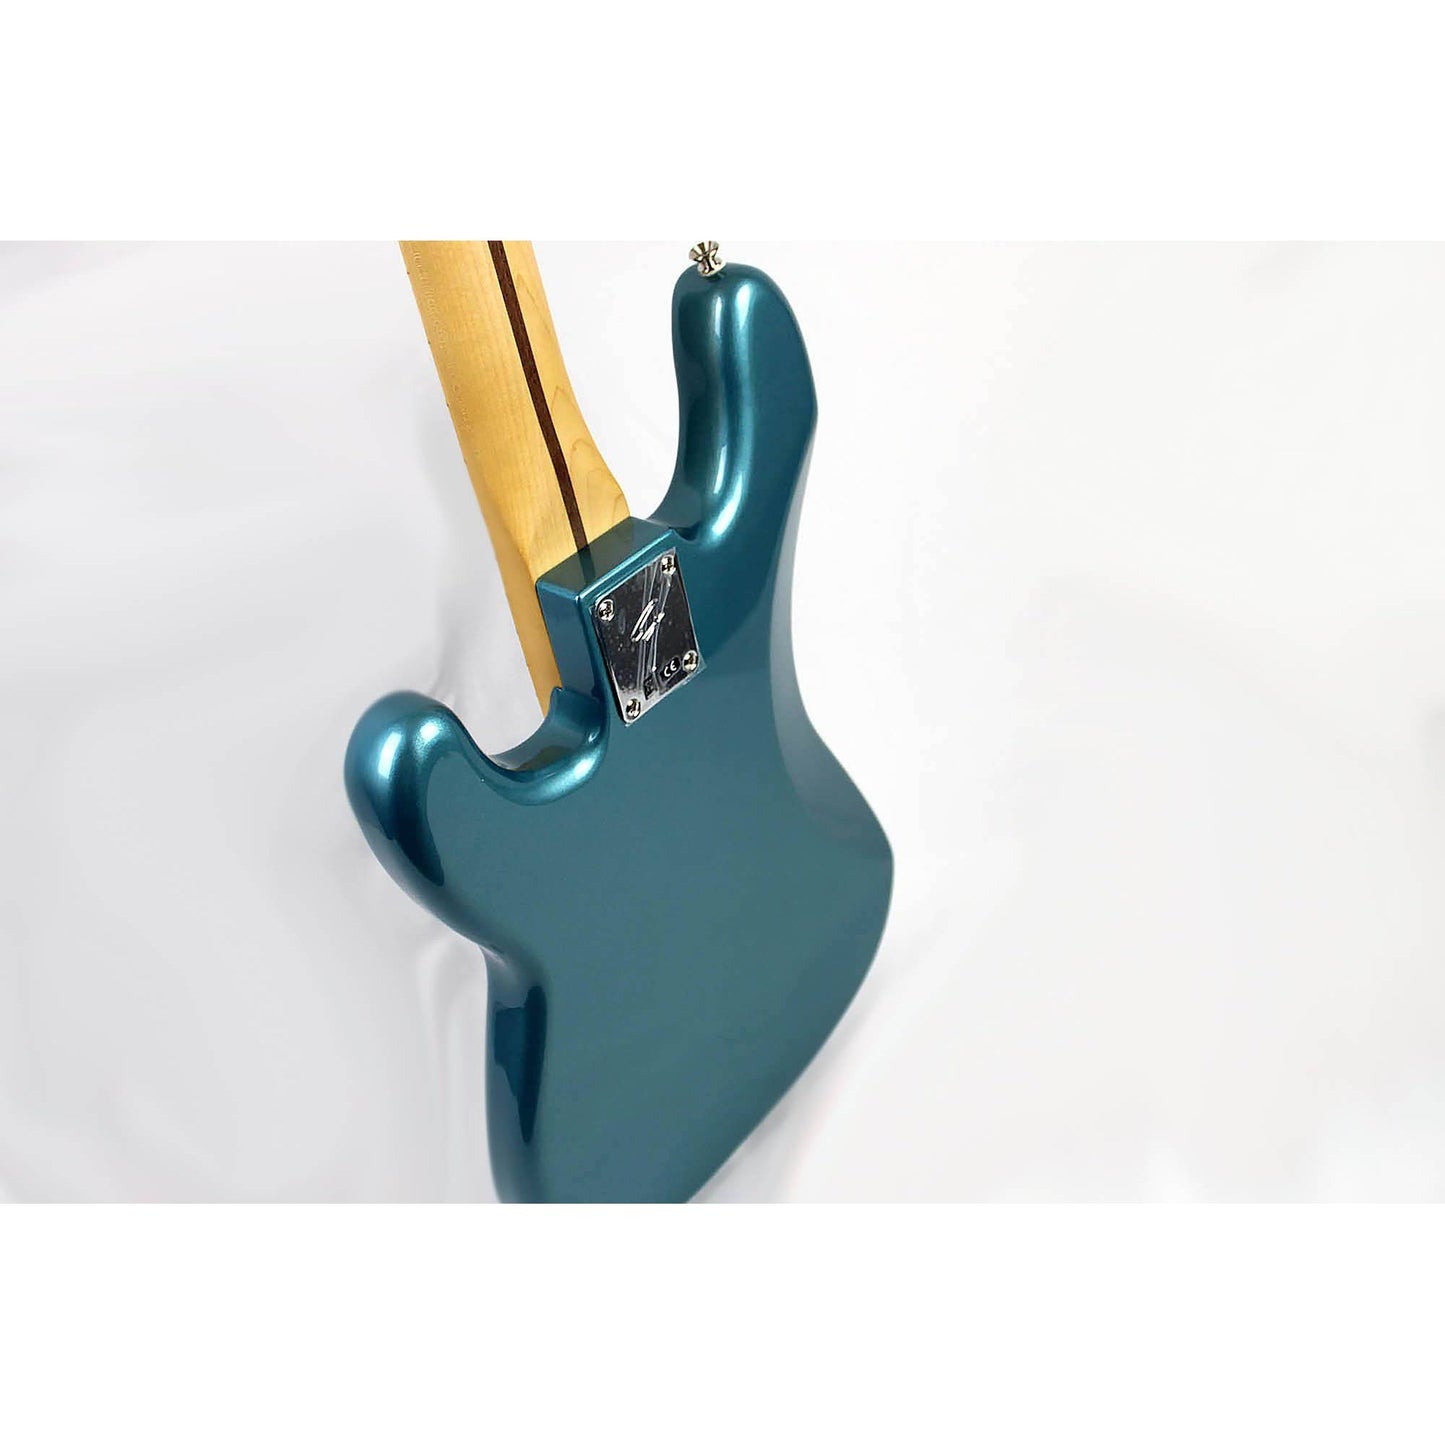 Fender Player Precision Bass - Tidepool with Maple Fingerboard - Leitz Music-885978911134-0149802513